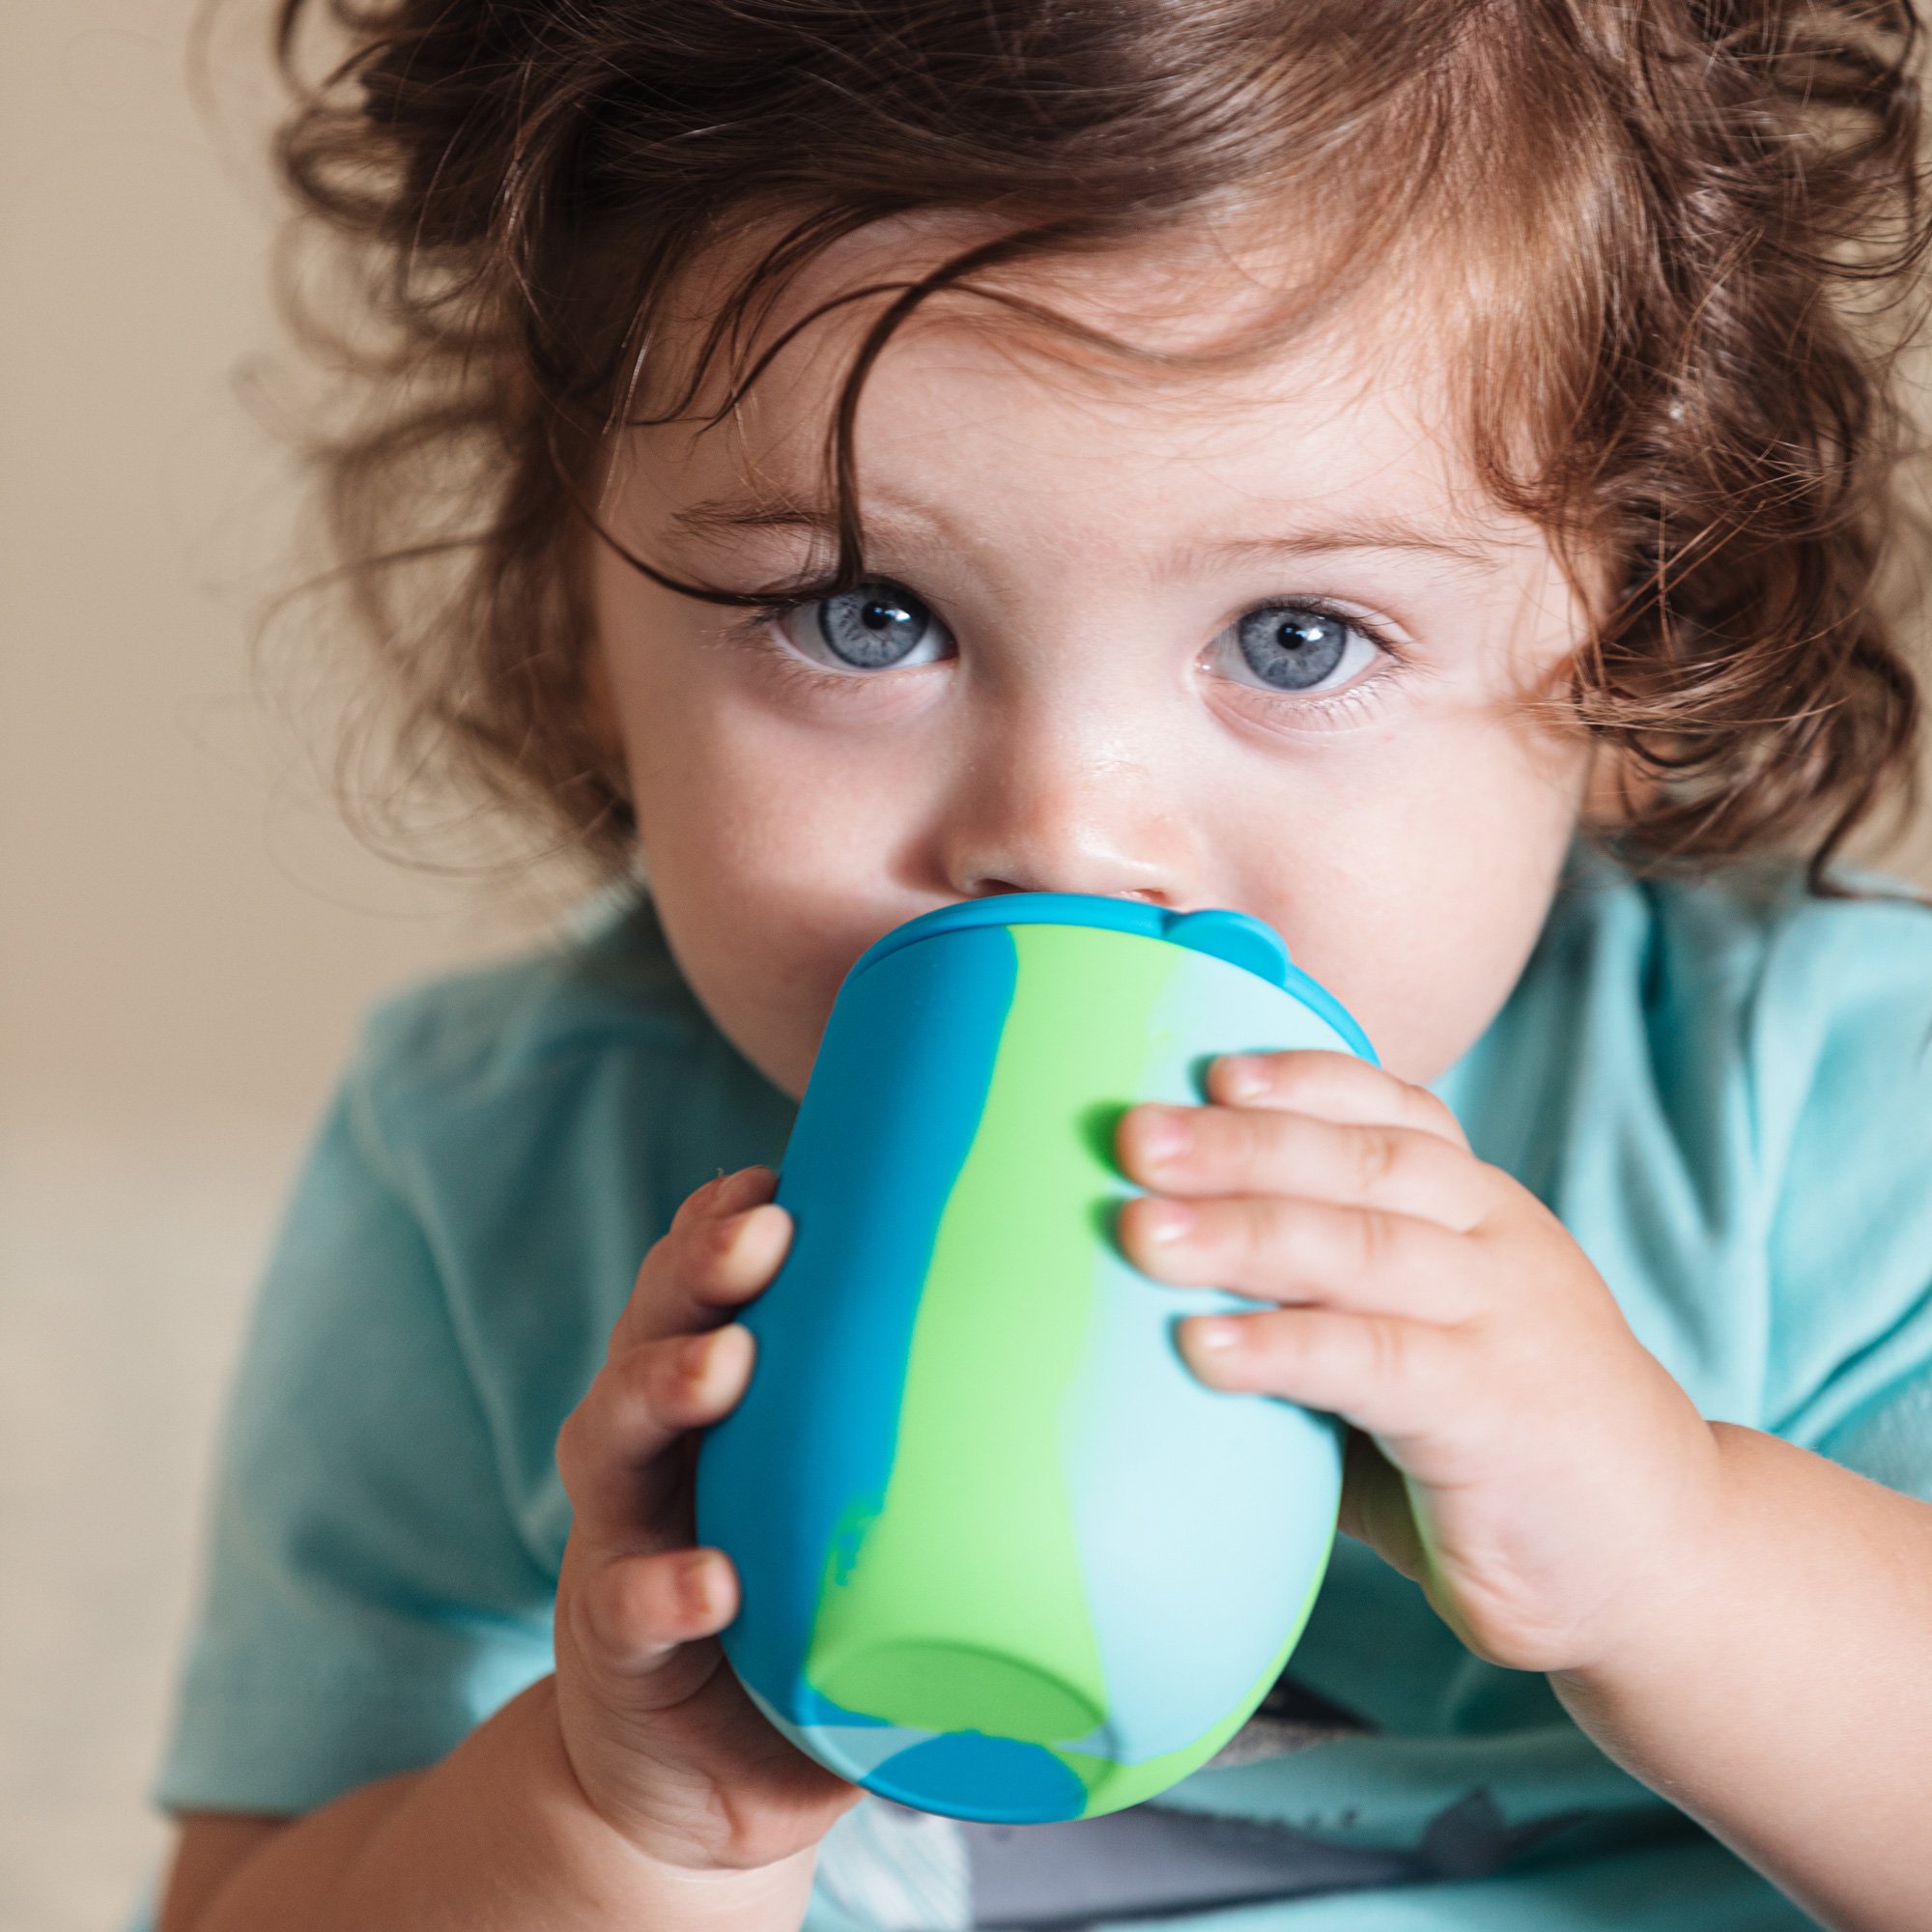 Small child drinking from cup